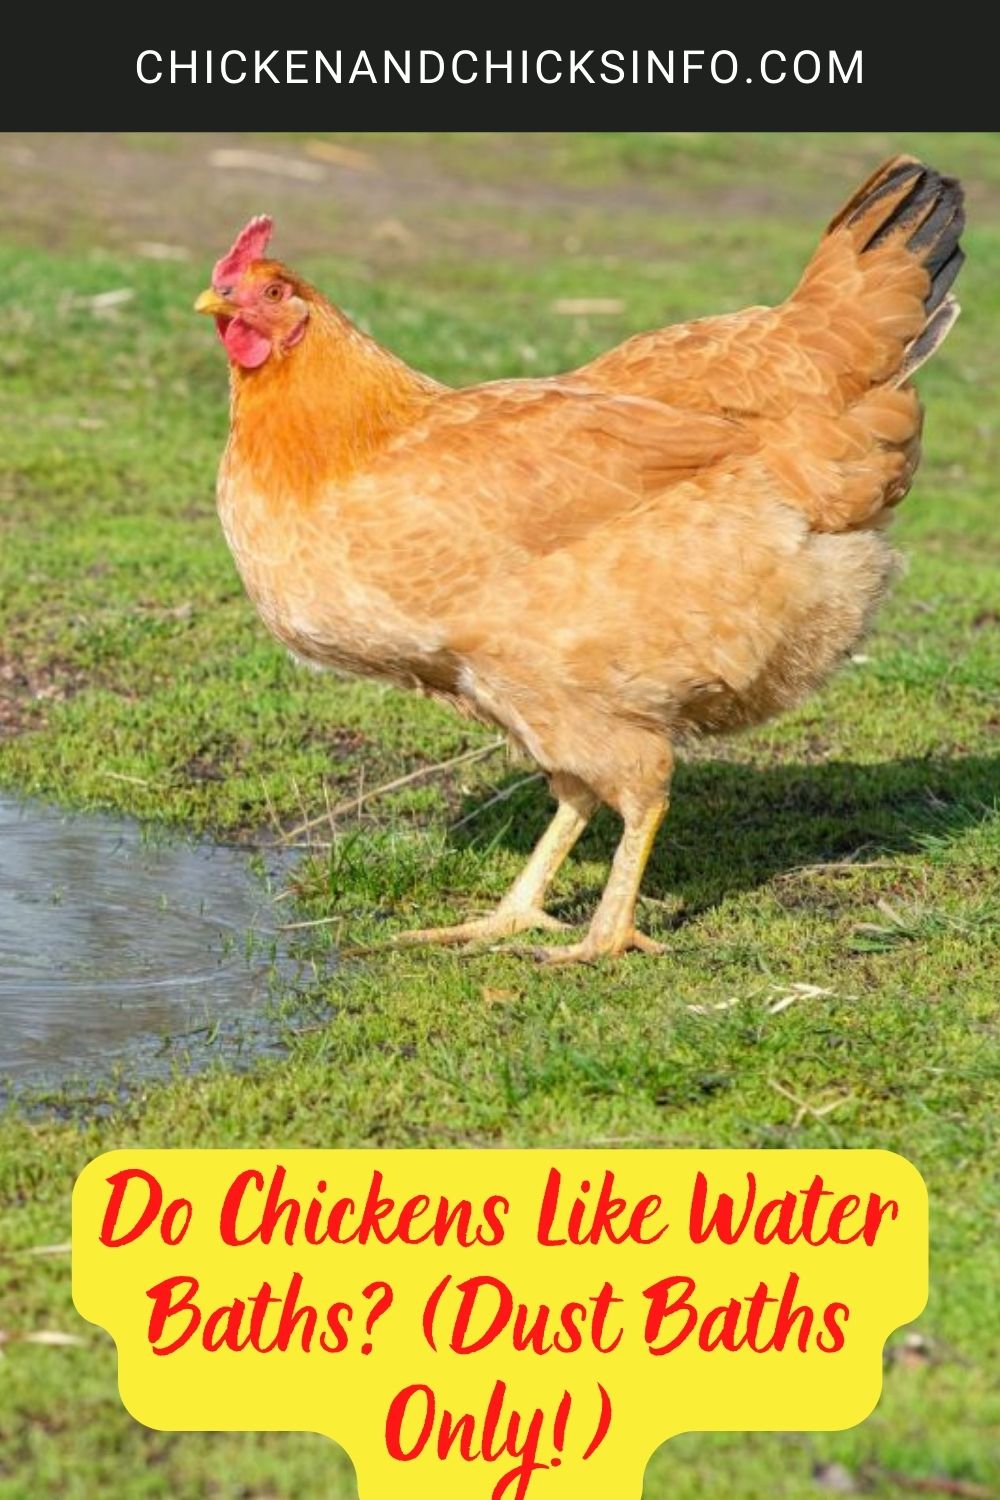 Do Chickens Like Water Baths? (Dust Baths Only!) poster.
